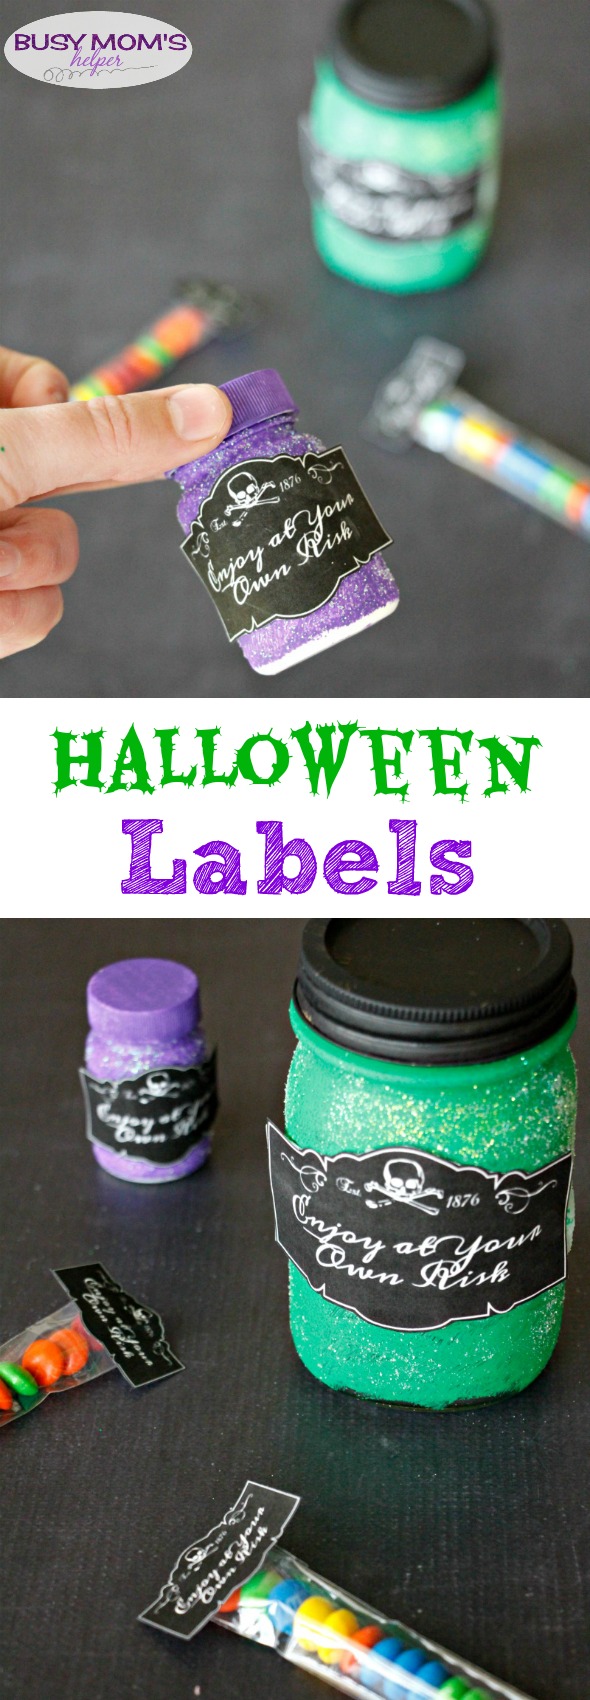 Free Printable Halloween Labels / Great for gifts, signs, treats or party favors!